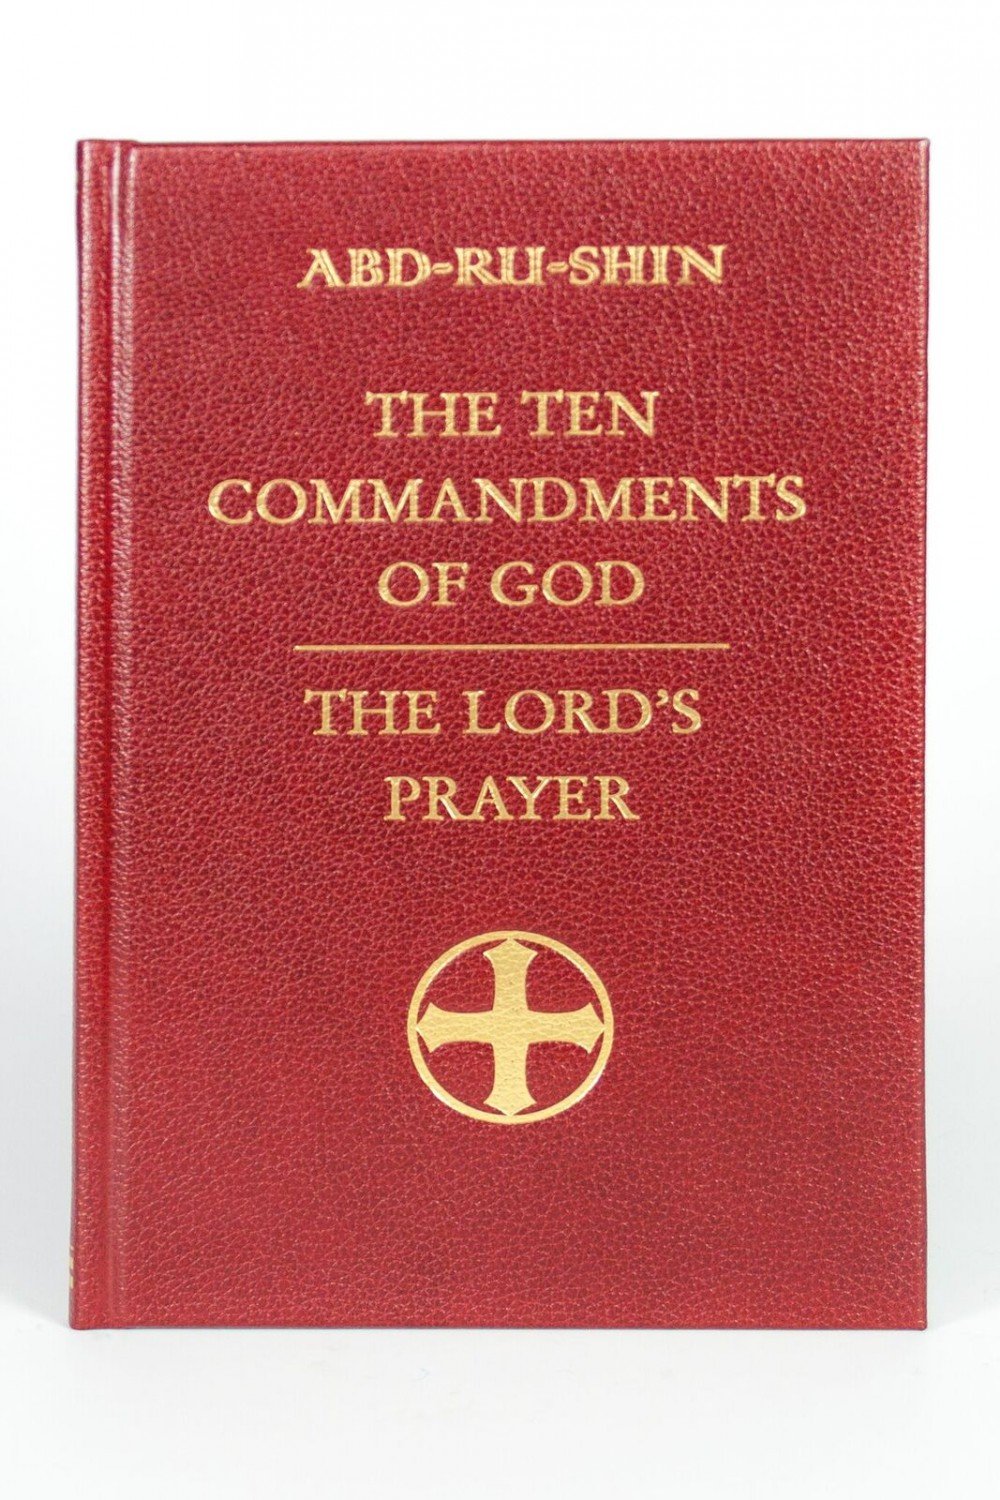 The Ten Commandments of God and the Lord's Prayer explained to mankind by  Abd-ru-shin